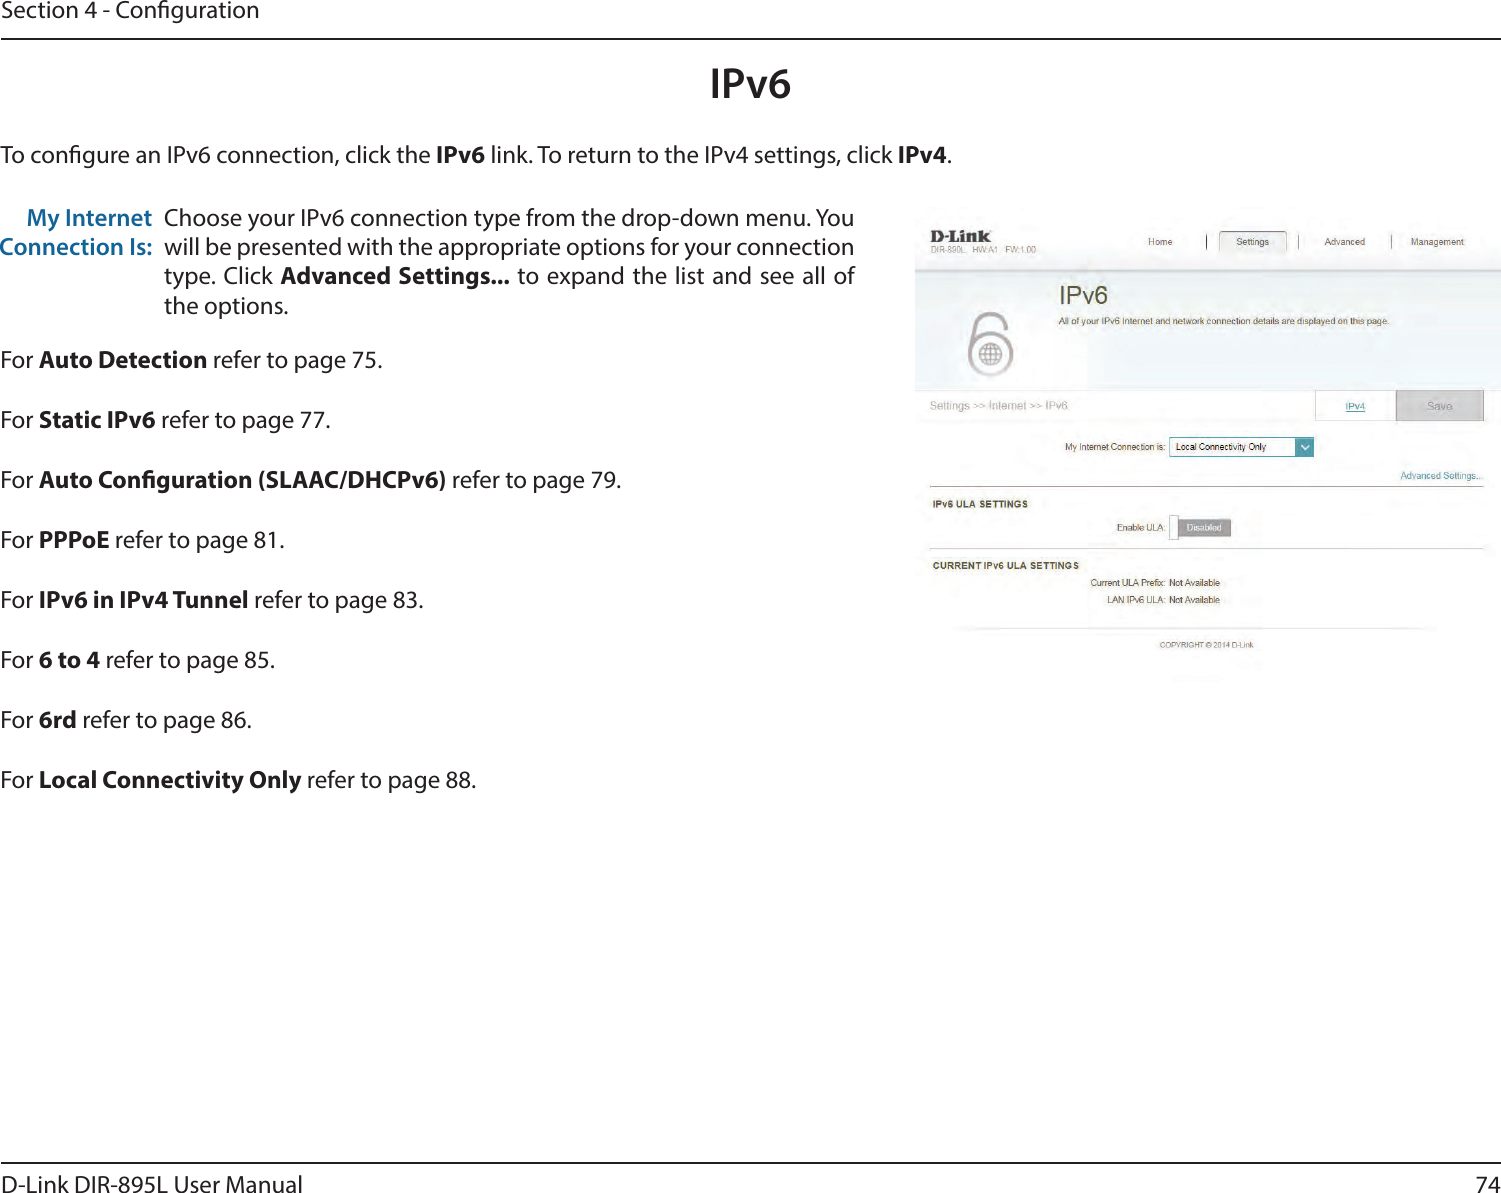 74D-Link DIR-895L User ManualSection 4 - CongurationIPv6To congure an IPv6 connection, click the IPv6 link. To return to the IPv4 settings, click IPv4.Choose your IPv6 connection type from the drop-down menu. You will be presented with the appropriate options for your connection type. Click Advanced Settings... to expand the list and see all of the options.My Internet Connection Is:For Auto Detection refer to page 75.For Static IPv6 refer to page 77.For Auto Conguration (SLAAC/DHCPv6) refer to page 79.For PPPoE refer to page 81.For IPv6 in IPv4 Tunnel refer to page 83.For 6 to 4 refer to page 85.For 6rd refer to page 86.For Local Connectivity Only refer to page 88.